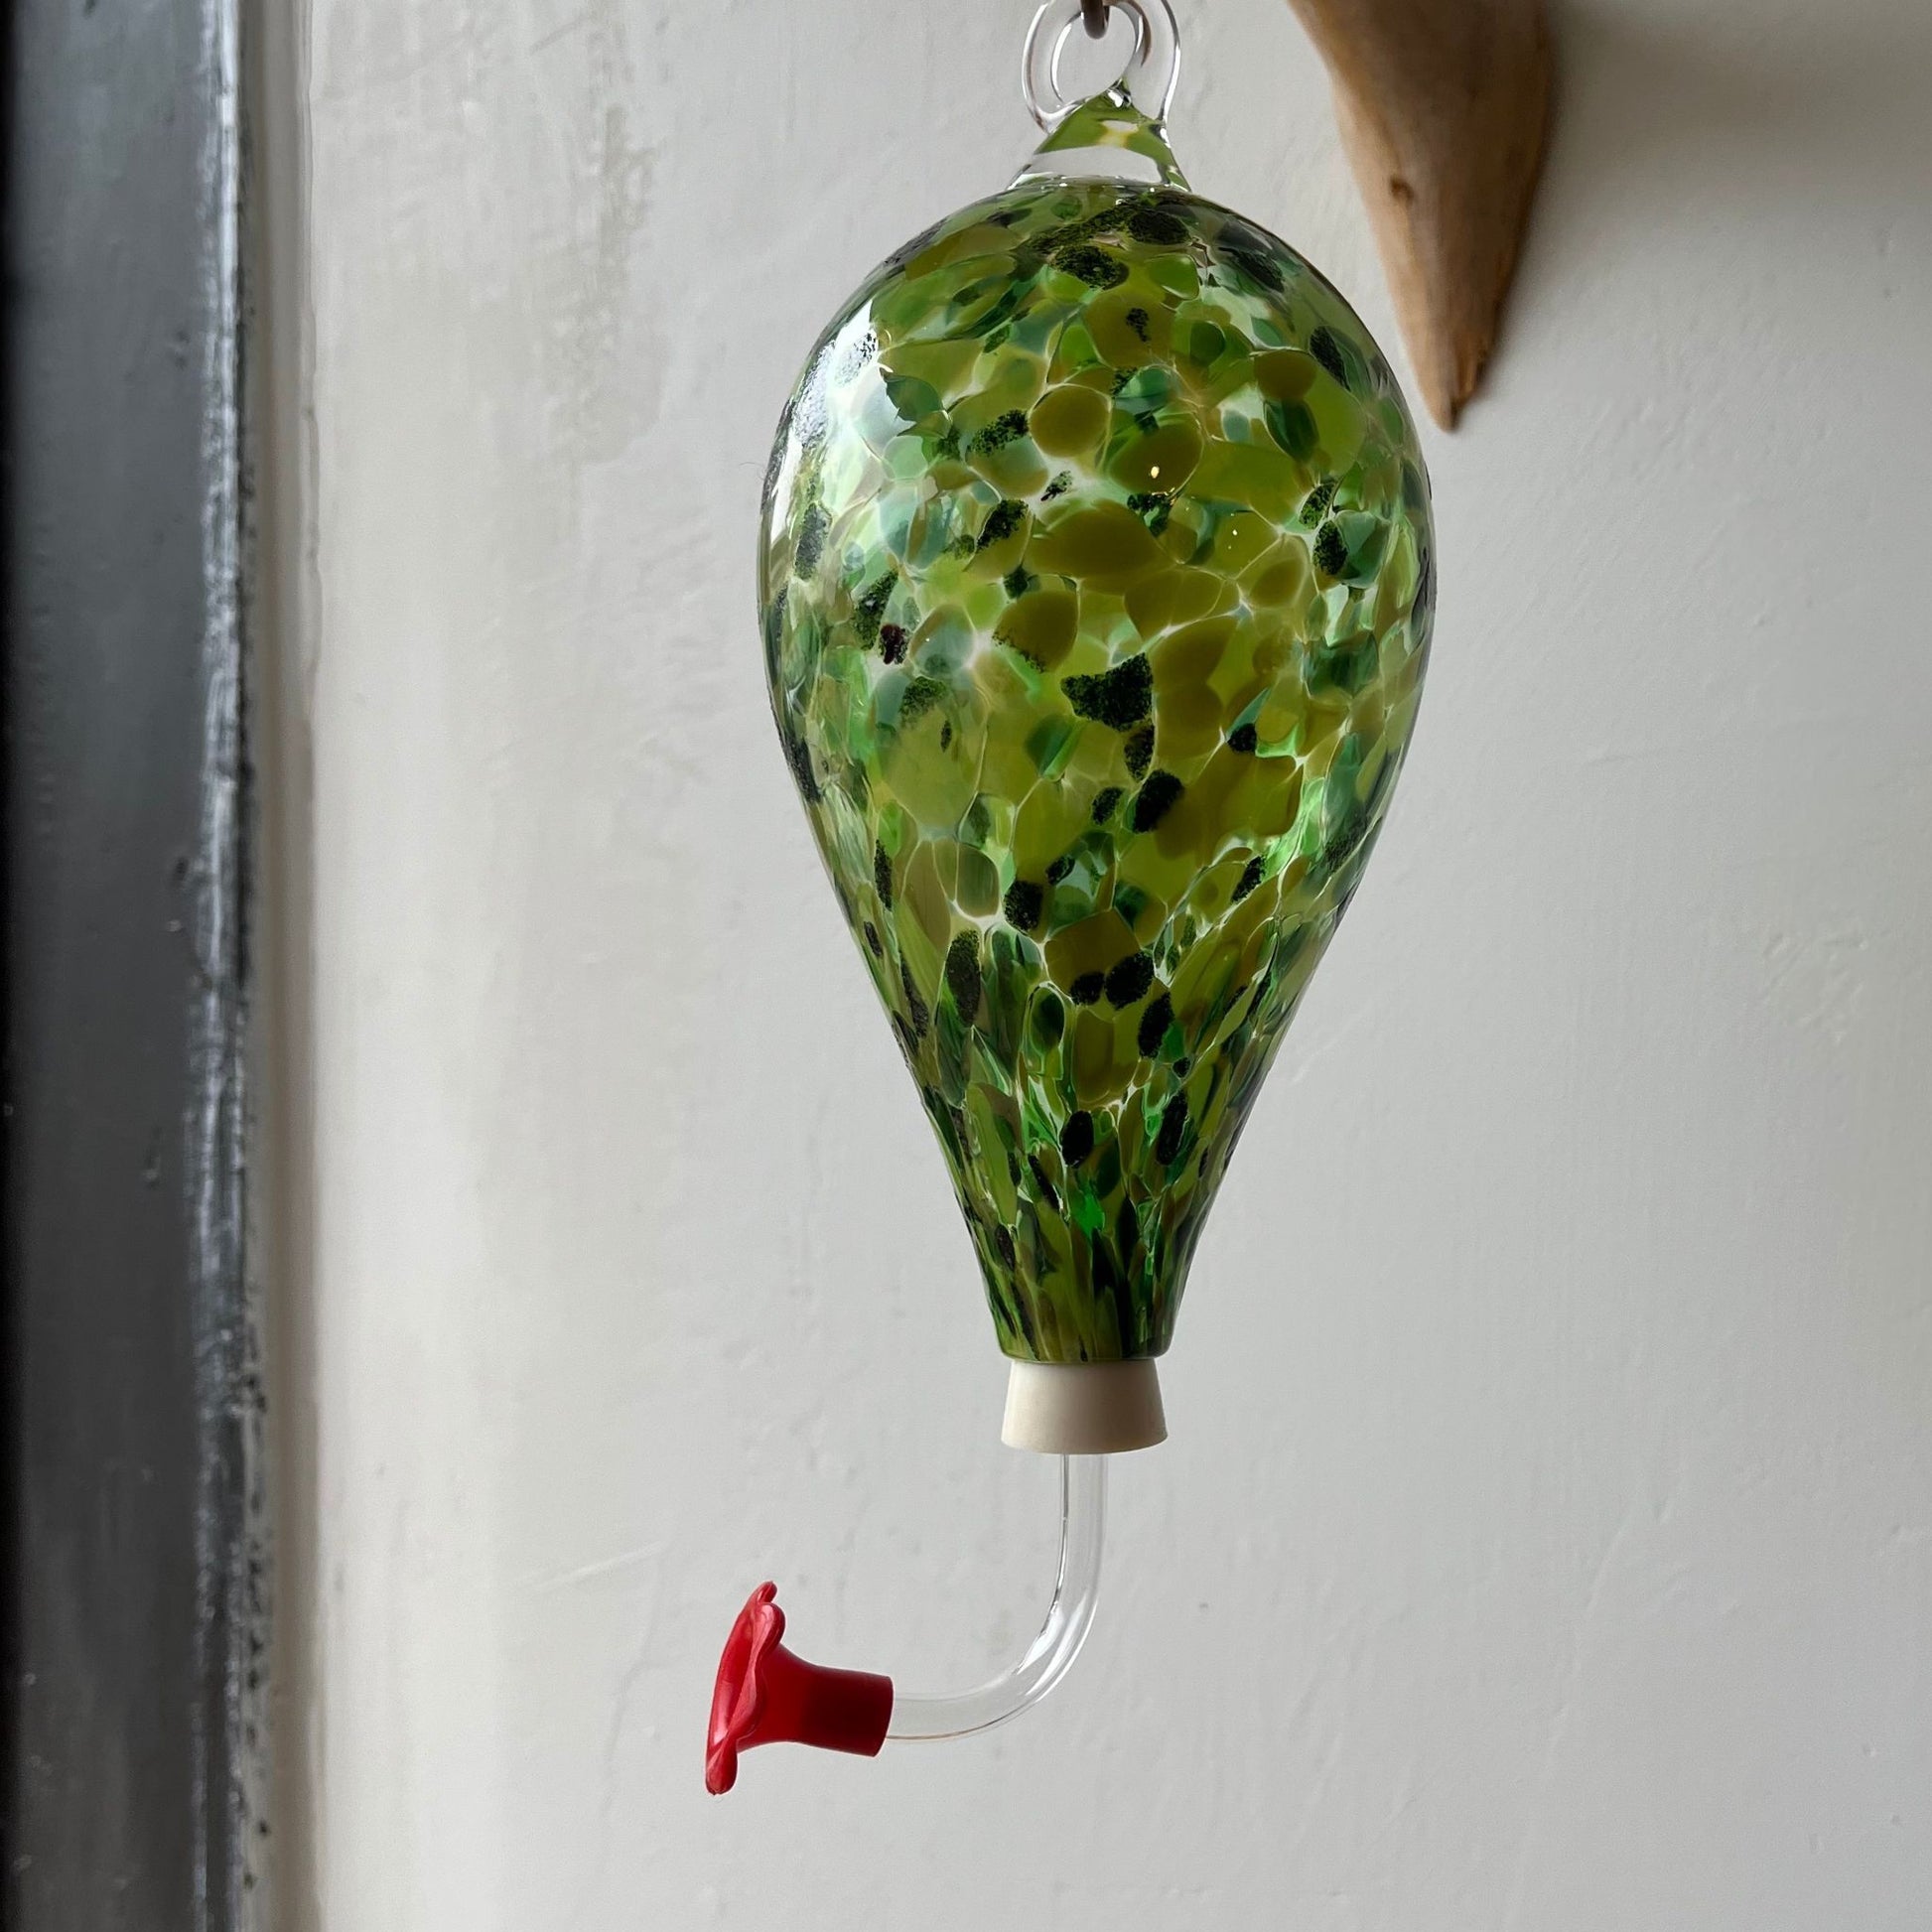 Green unique Glass Hummingbird Feeder.They are handblown glass made in the USA. The feeder tube is removable allowing for easy cleaning and refilling.